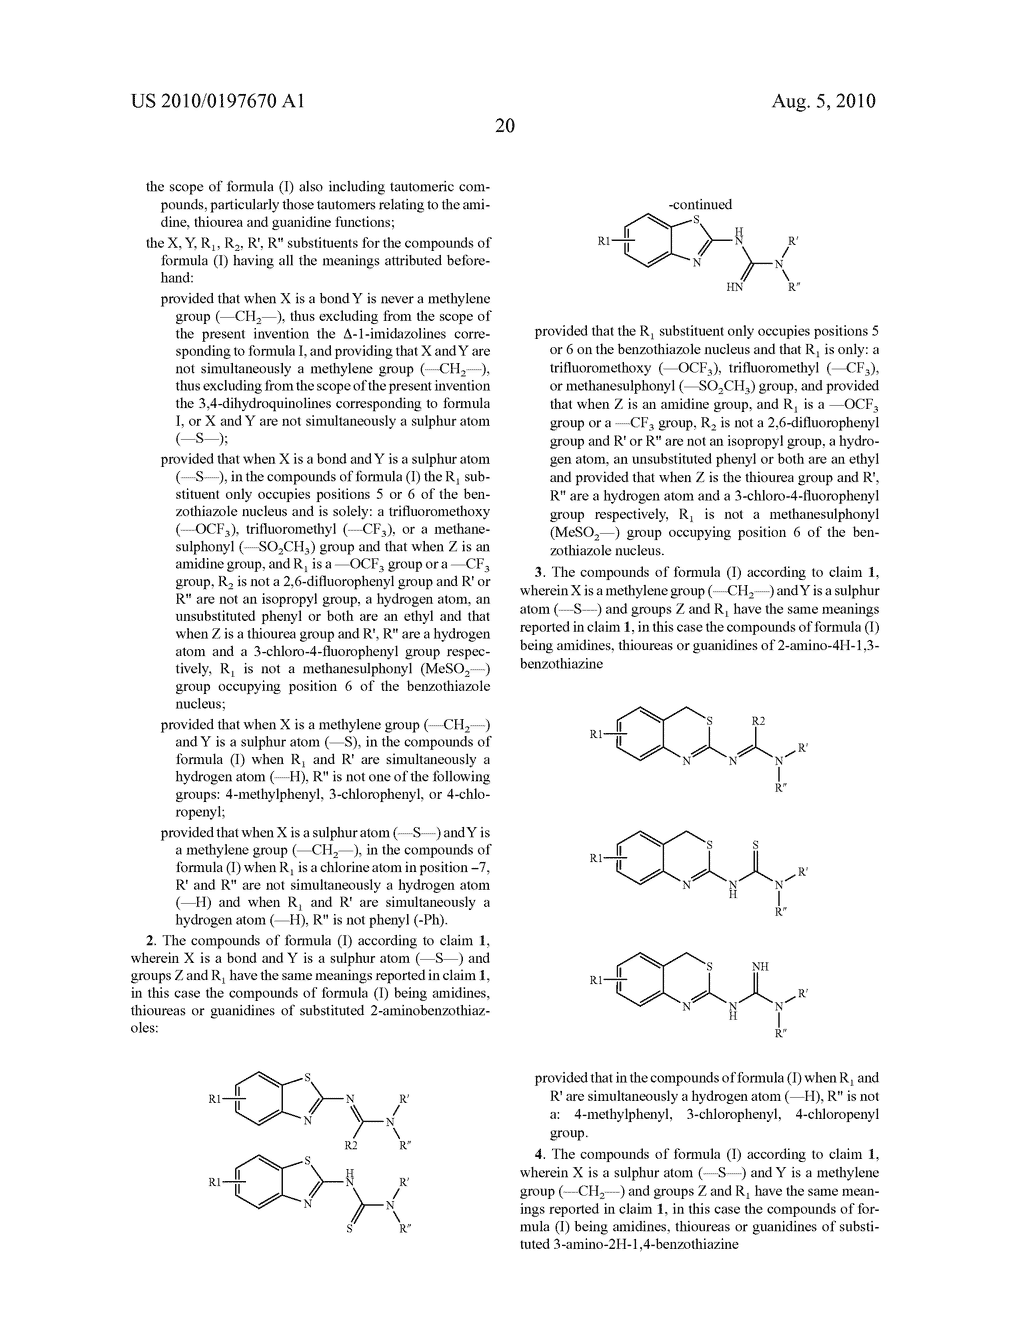 AMIDINE, THIOUREA AND GUANIDINE DERIVATIVES OF 2-AMINOBENZOTHIAZOLES AND AMINOBENZOTHIAZINES FOR THEIR USE AS PHARMACOLOGICAL AGENTS FOR THE TREATMENT OF NEURODEGENERATIVE PATHOLOGIES - diagram, schematic, and image 21